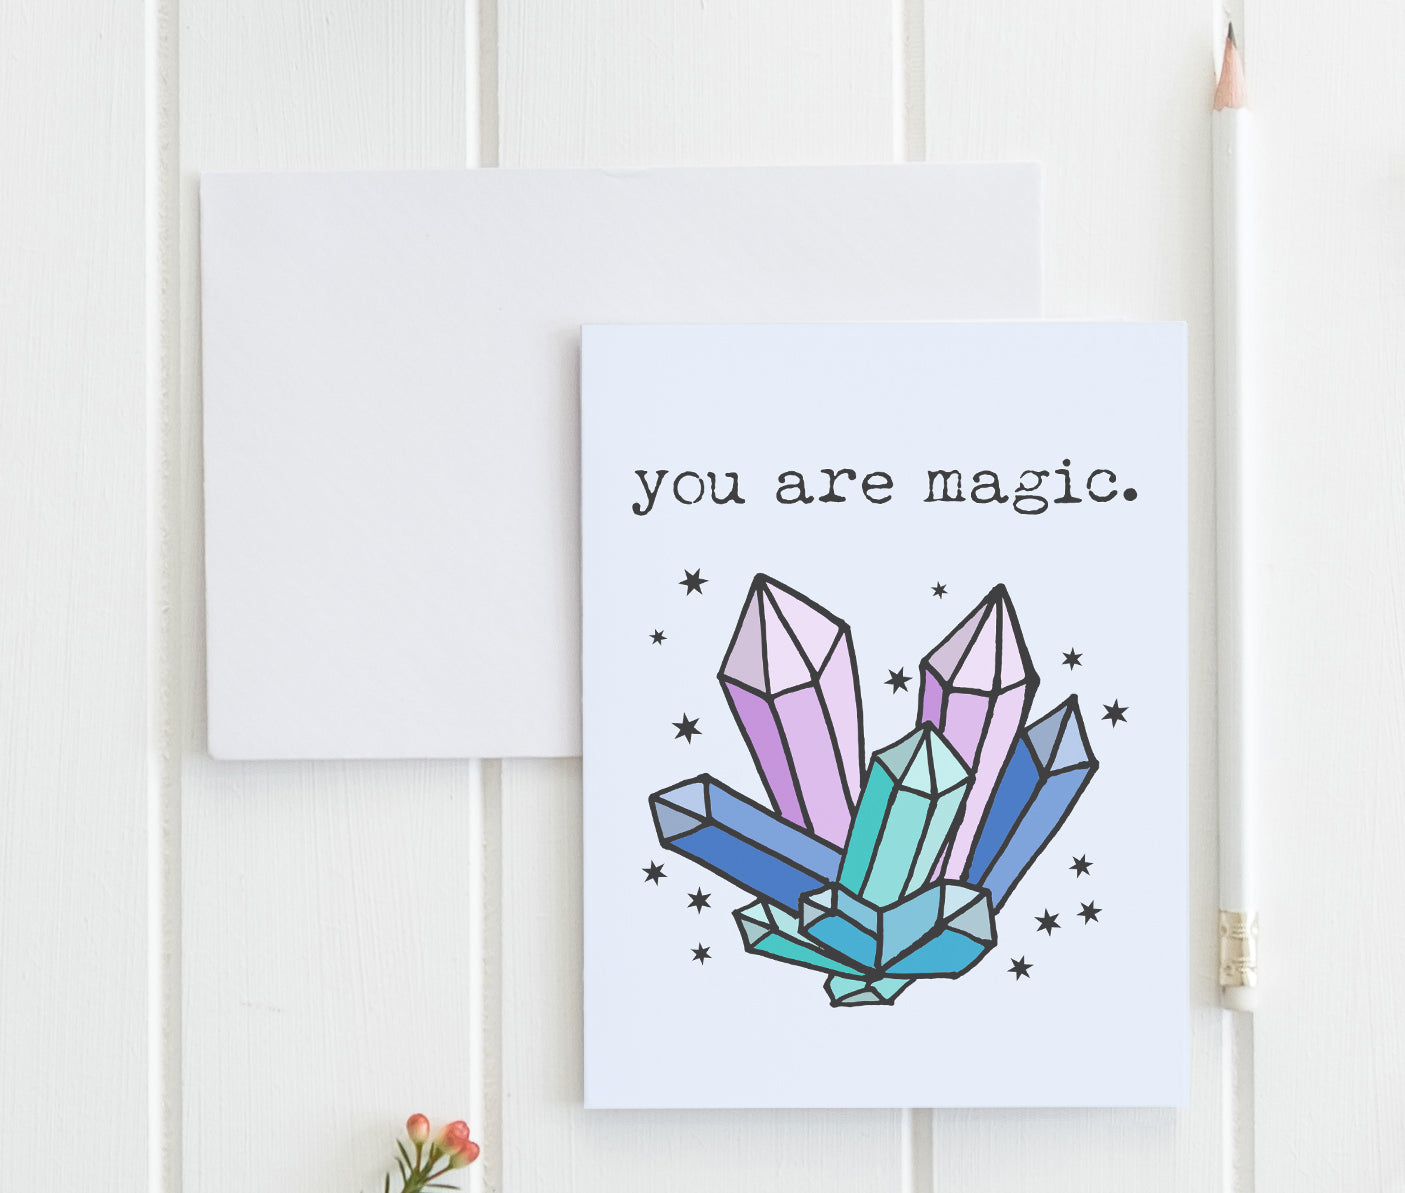 a card that says you are magic on it